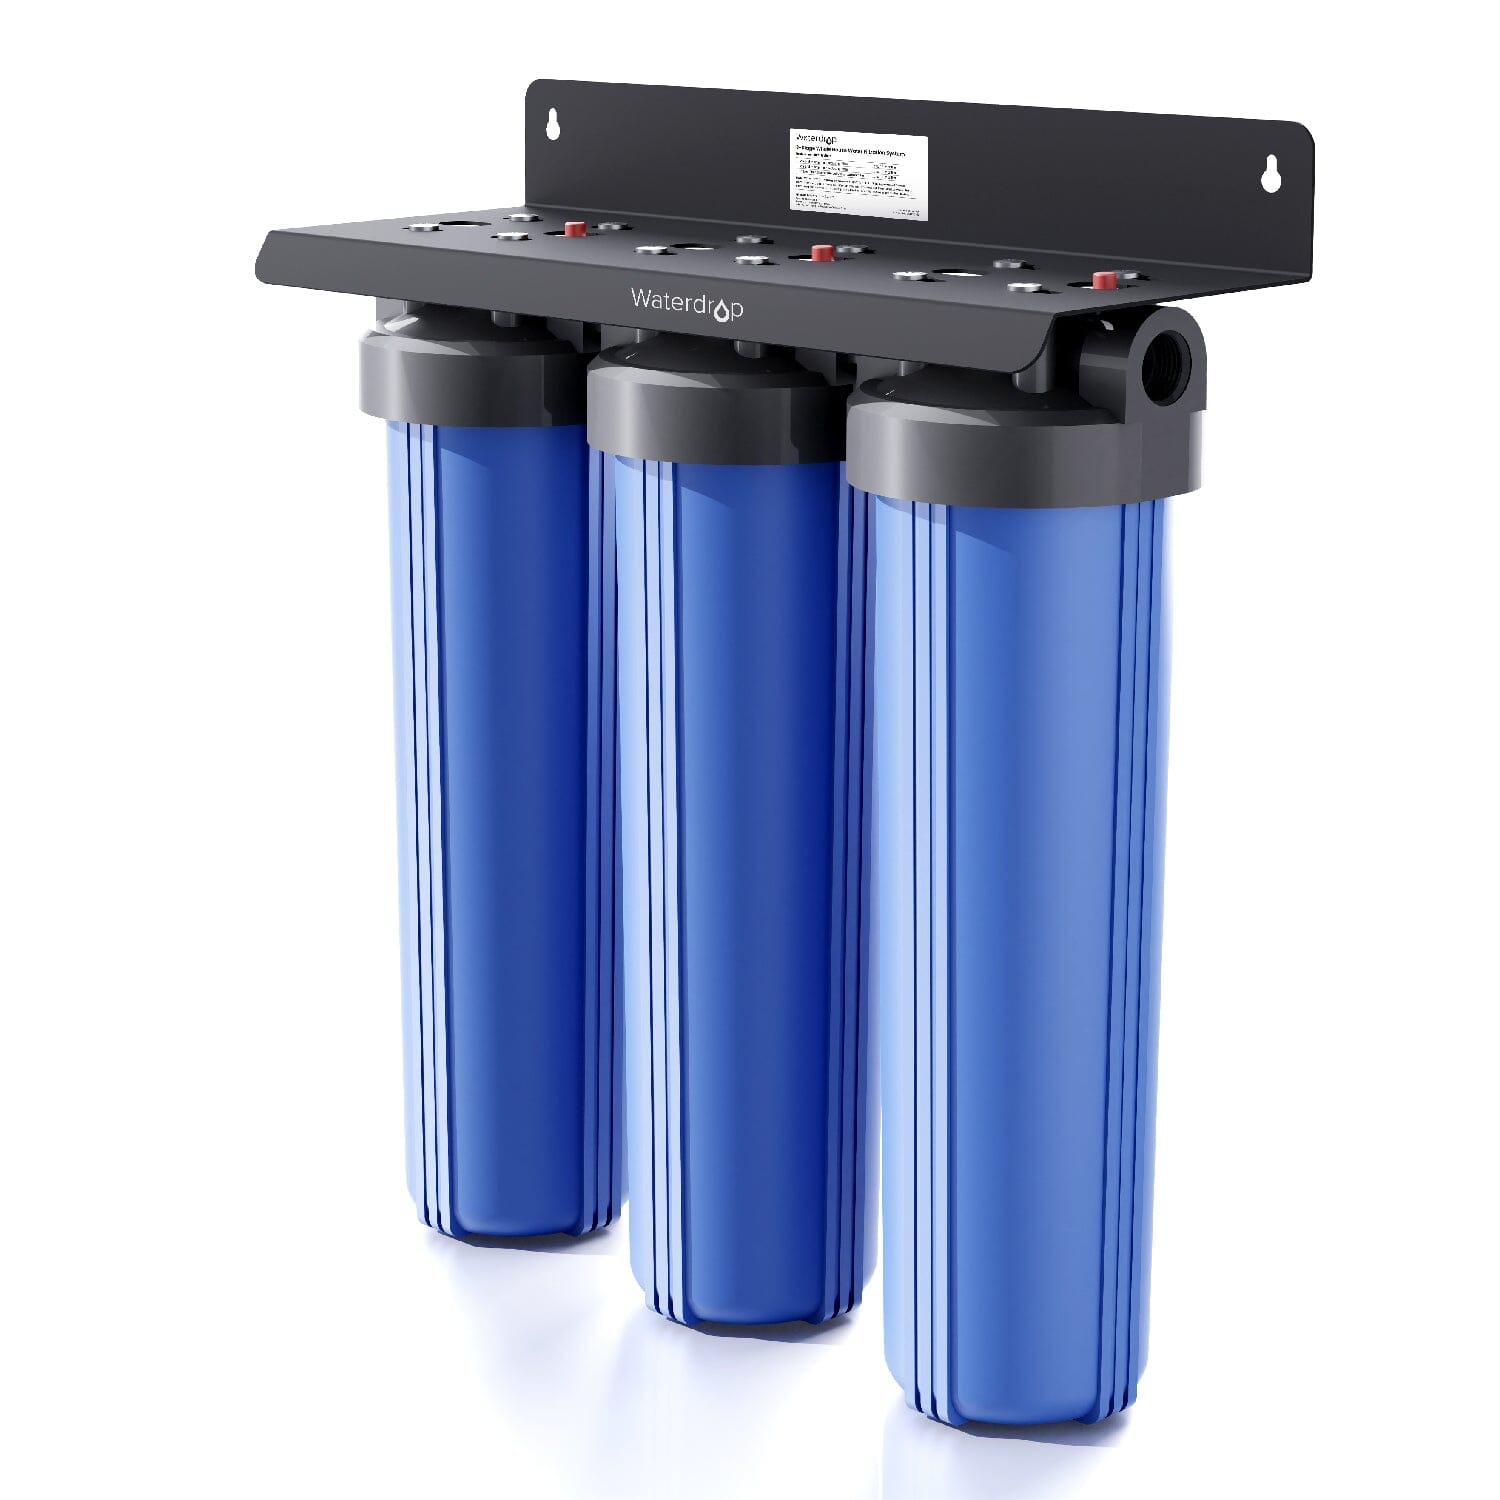 Waterdrop 3-Stage Whole House Water Filter System with Carbon Filter & Sediment Filter